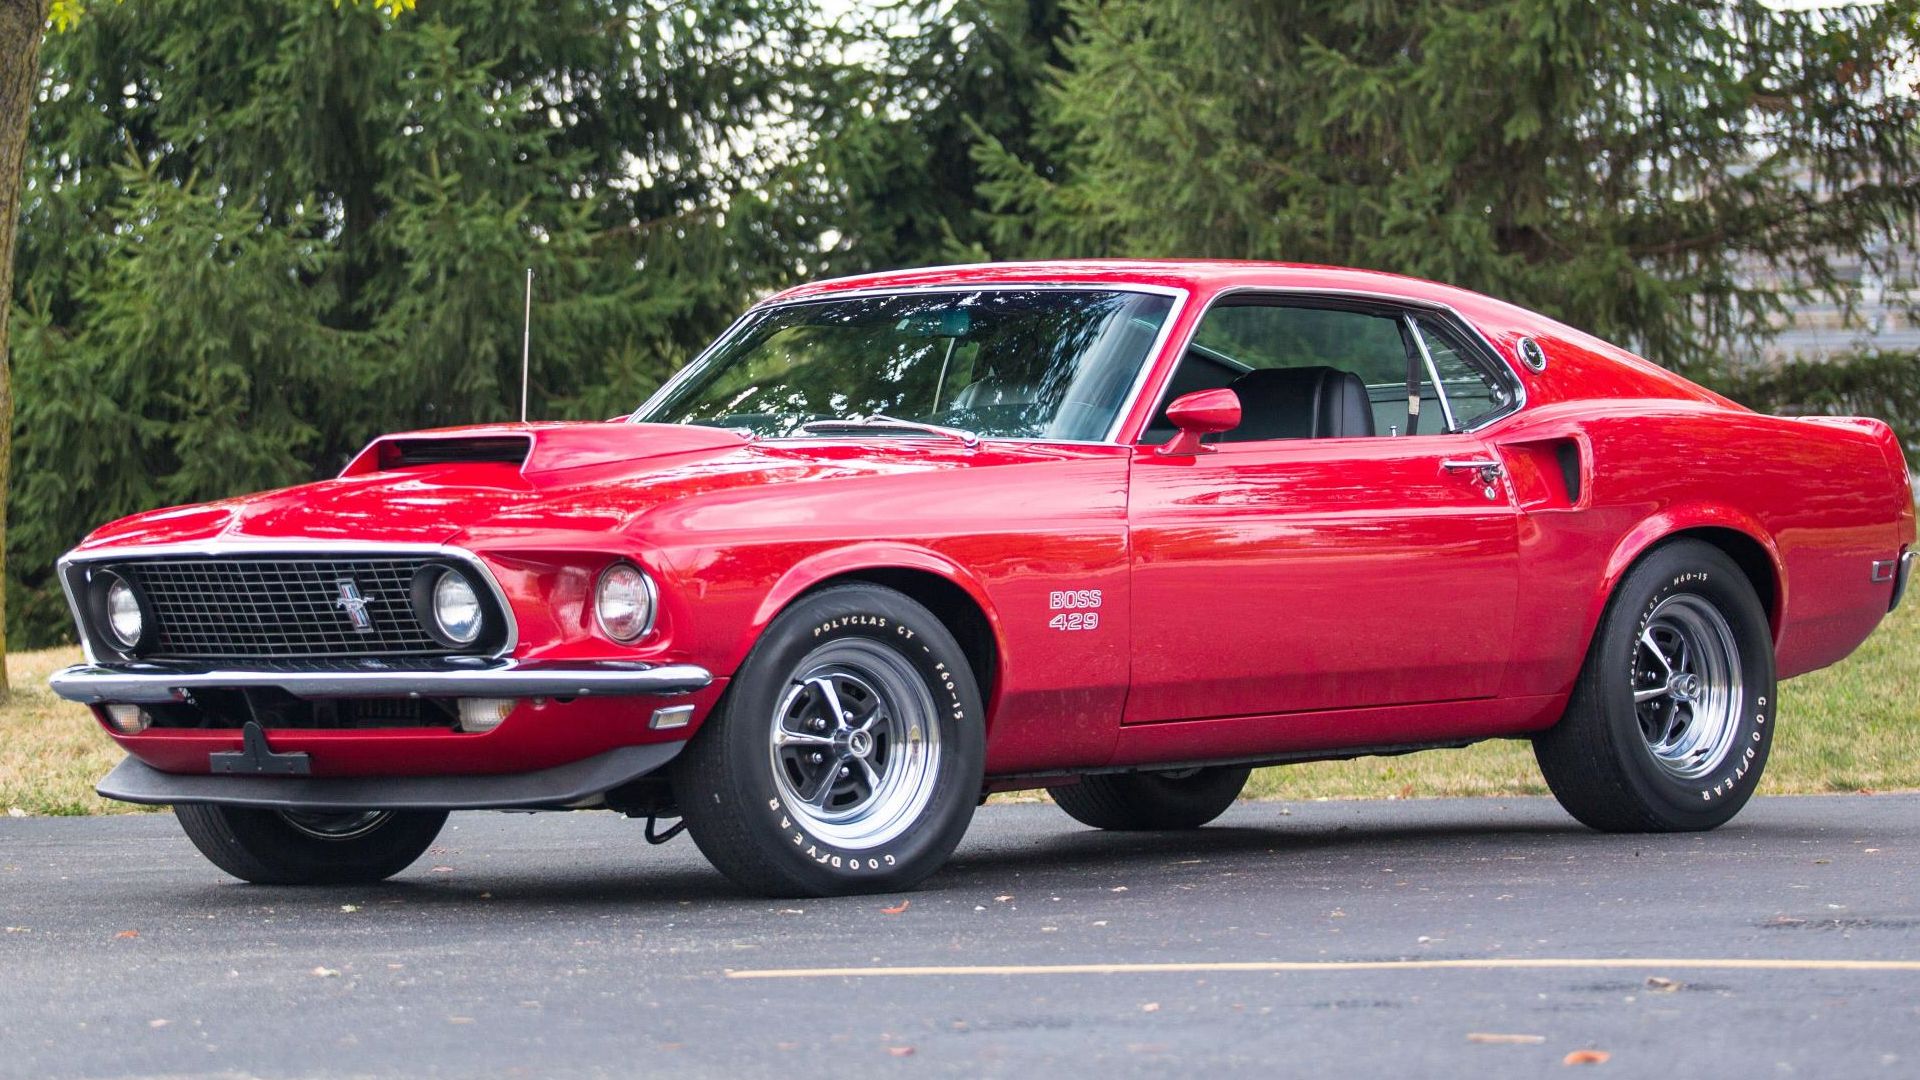 10 Things That Make The Ford Mustang Boss 429 The Ultimate Muscle Car